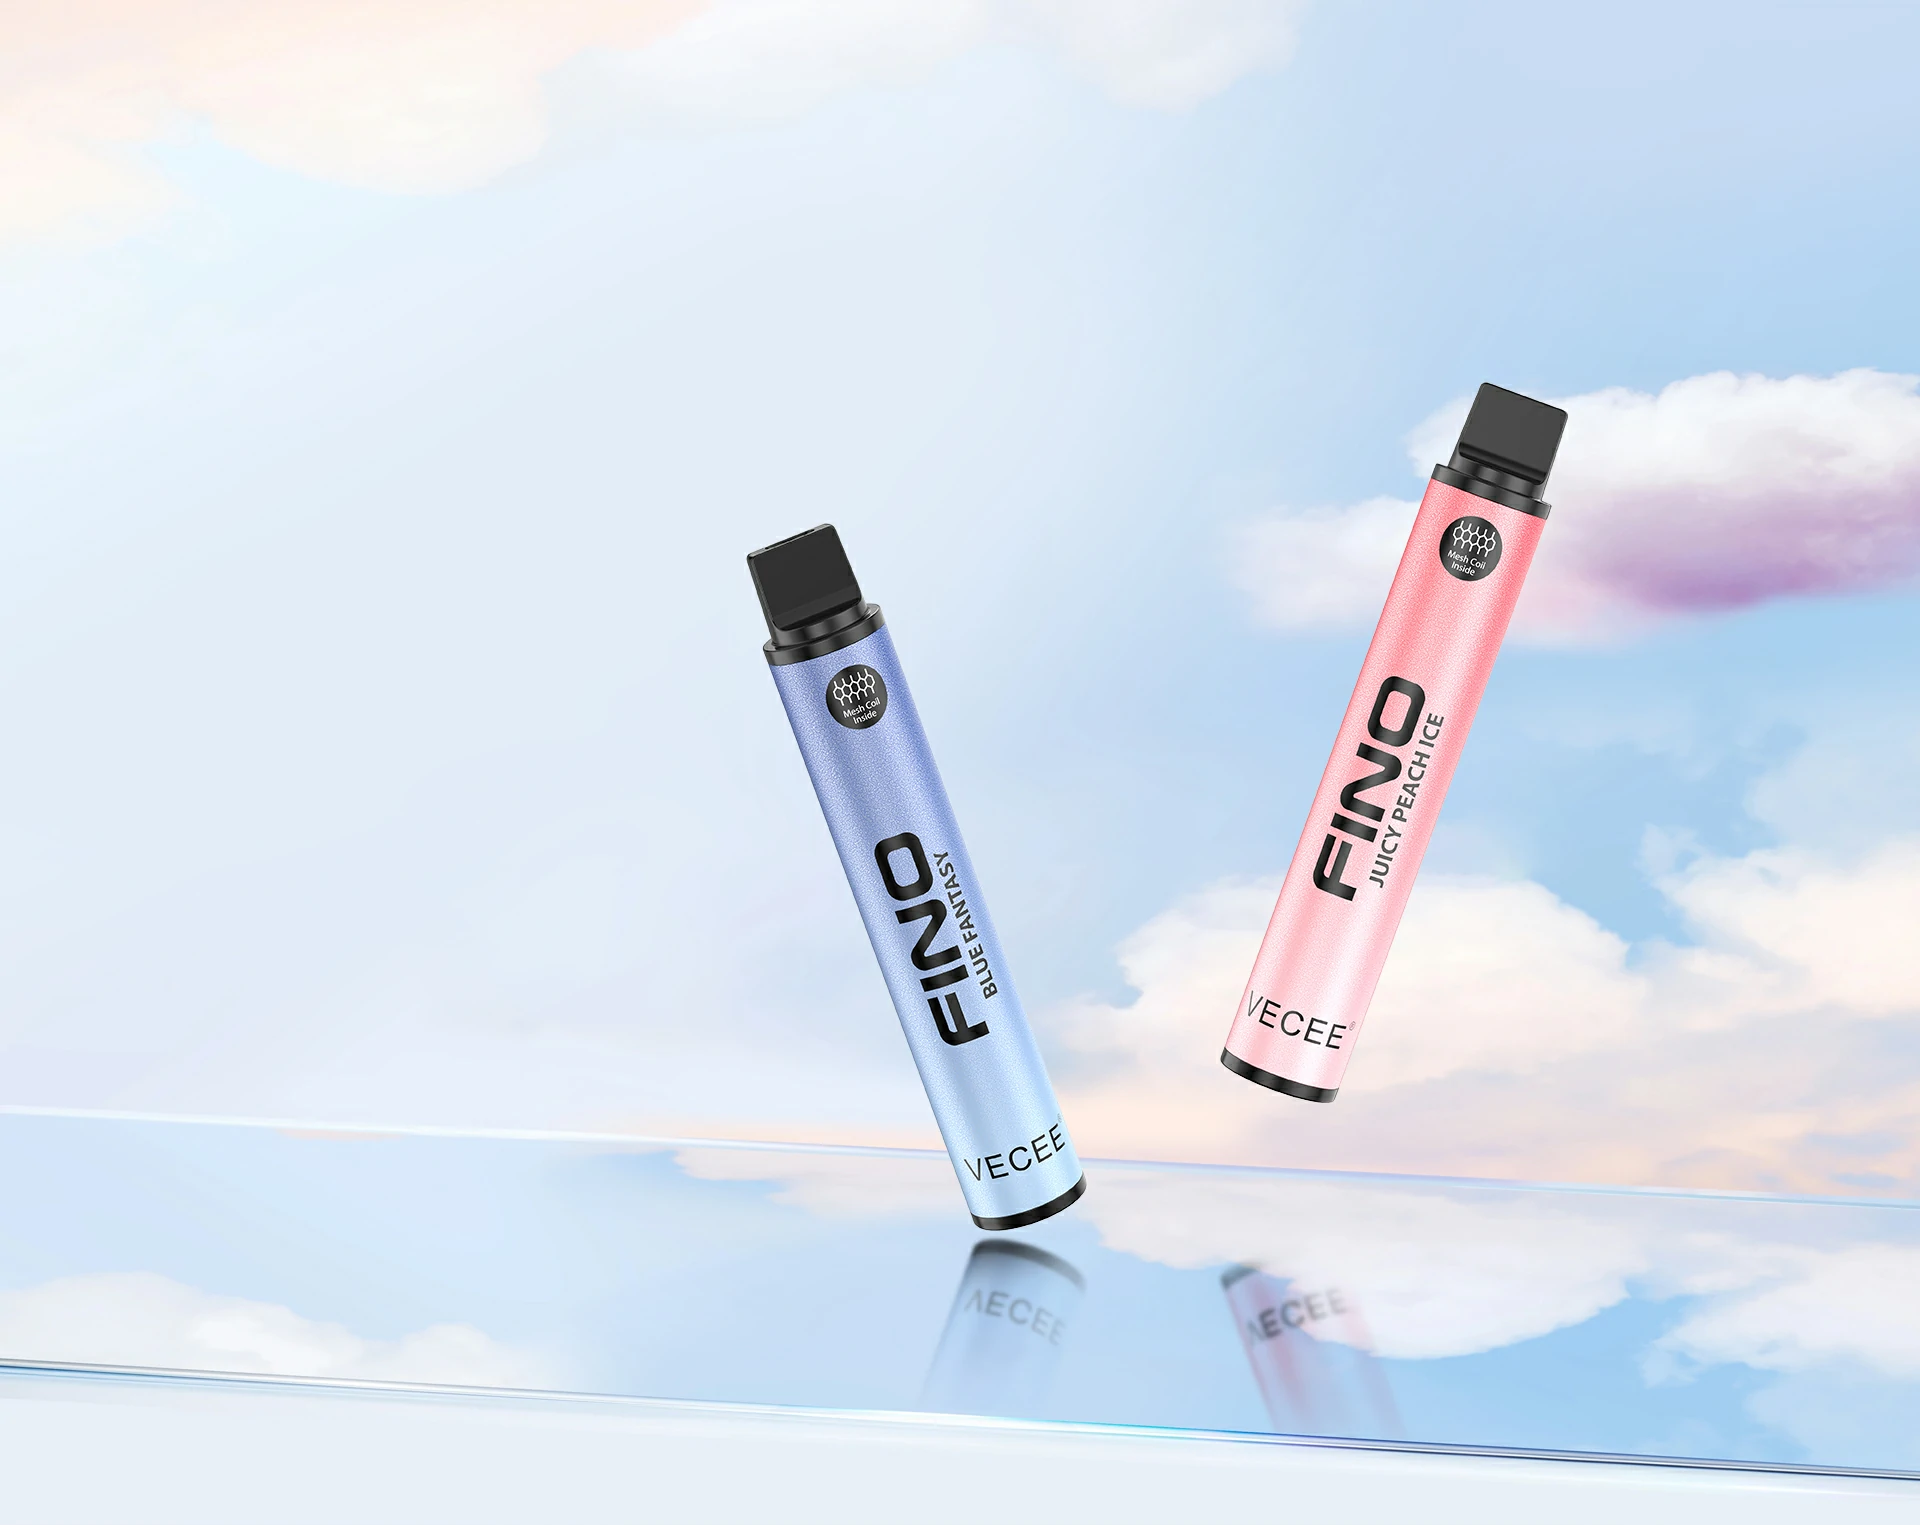 VECEE FINO 800puffs 430mAh Disposable Vapes product appearance